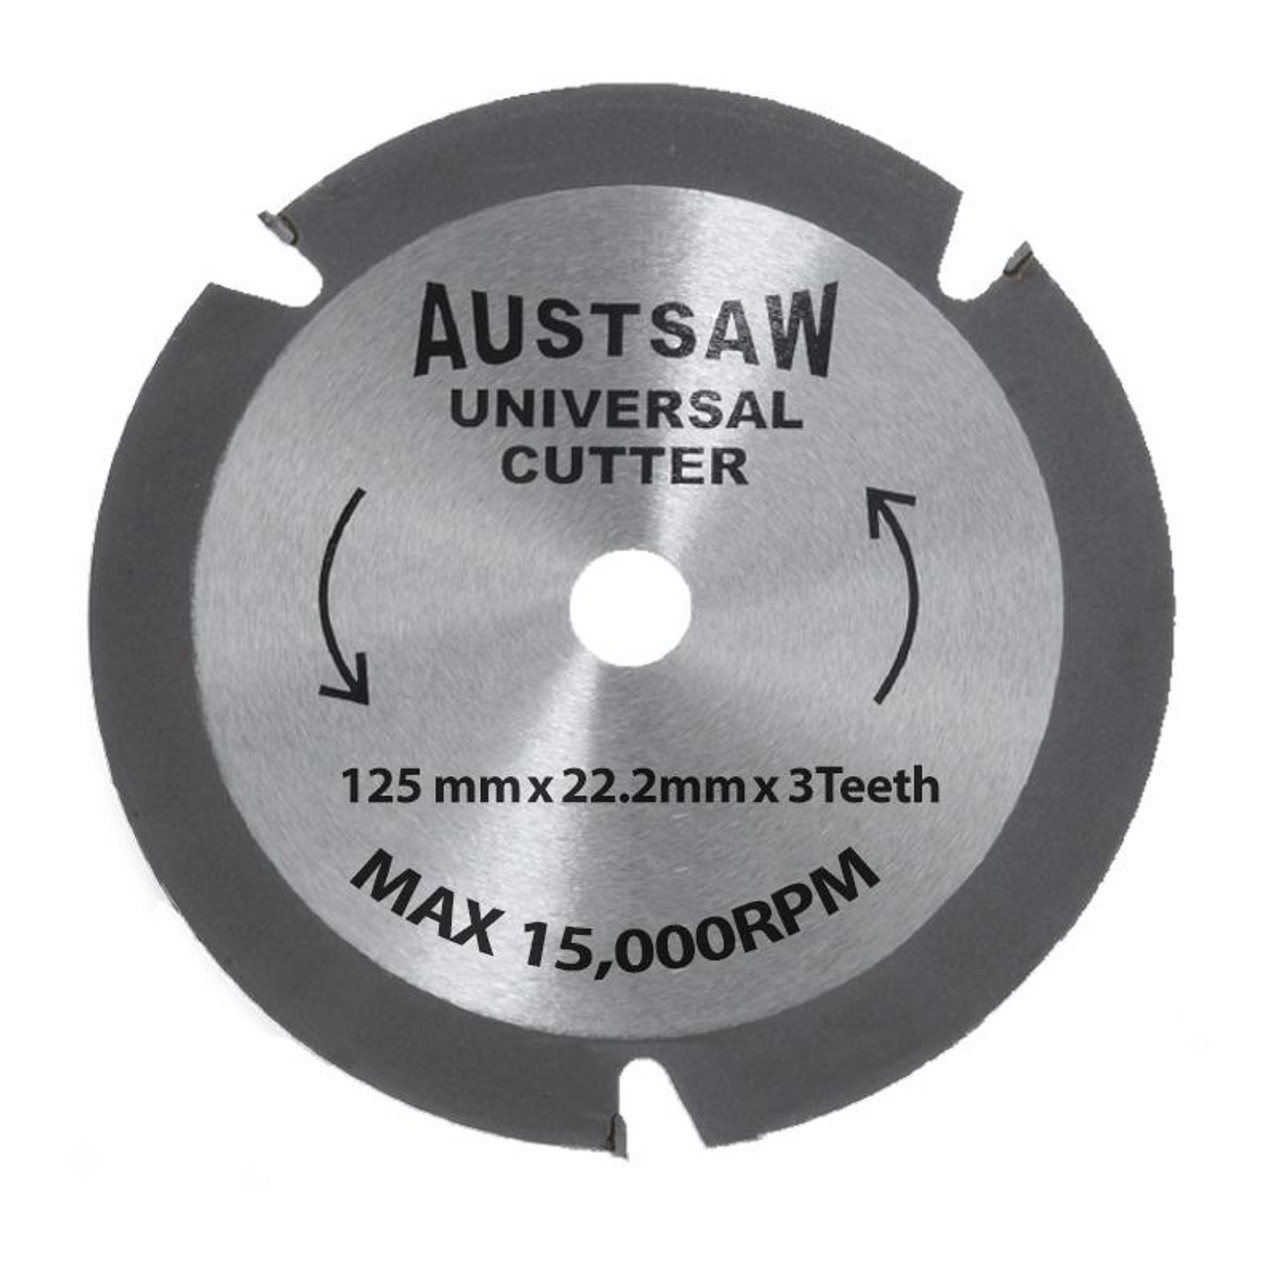 Austsaw - 125Mm (5In) Universal Cutter - 22.2Mm Bore - 3Tct Teeth